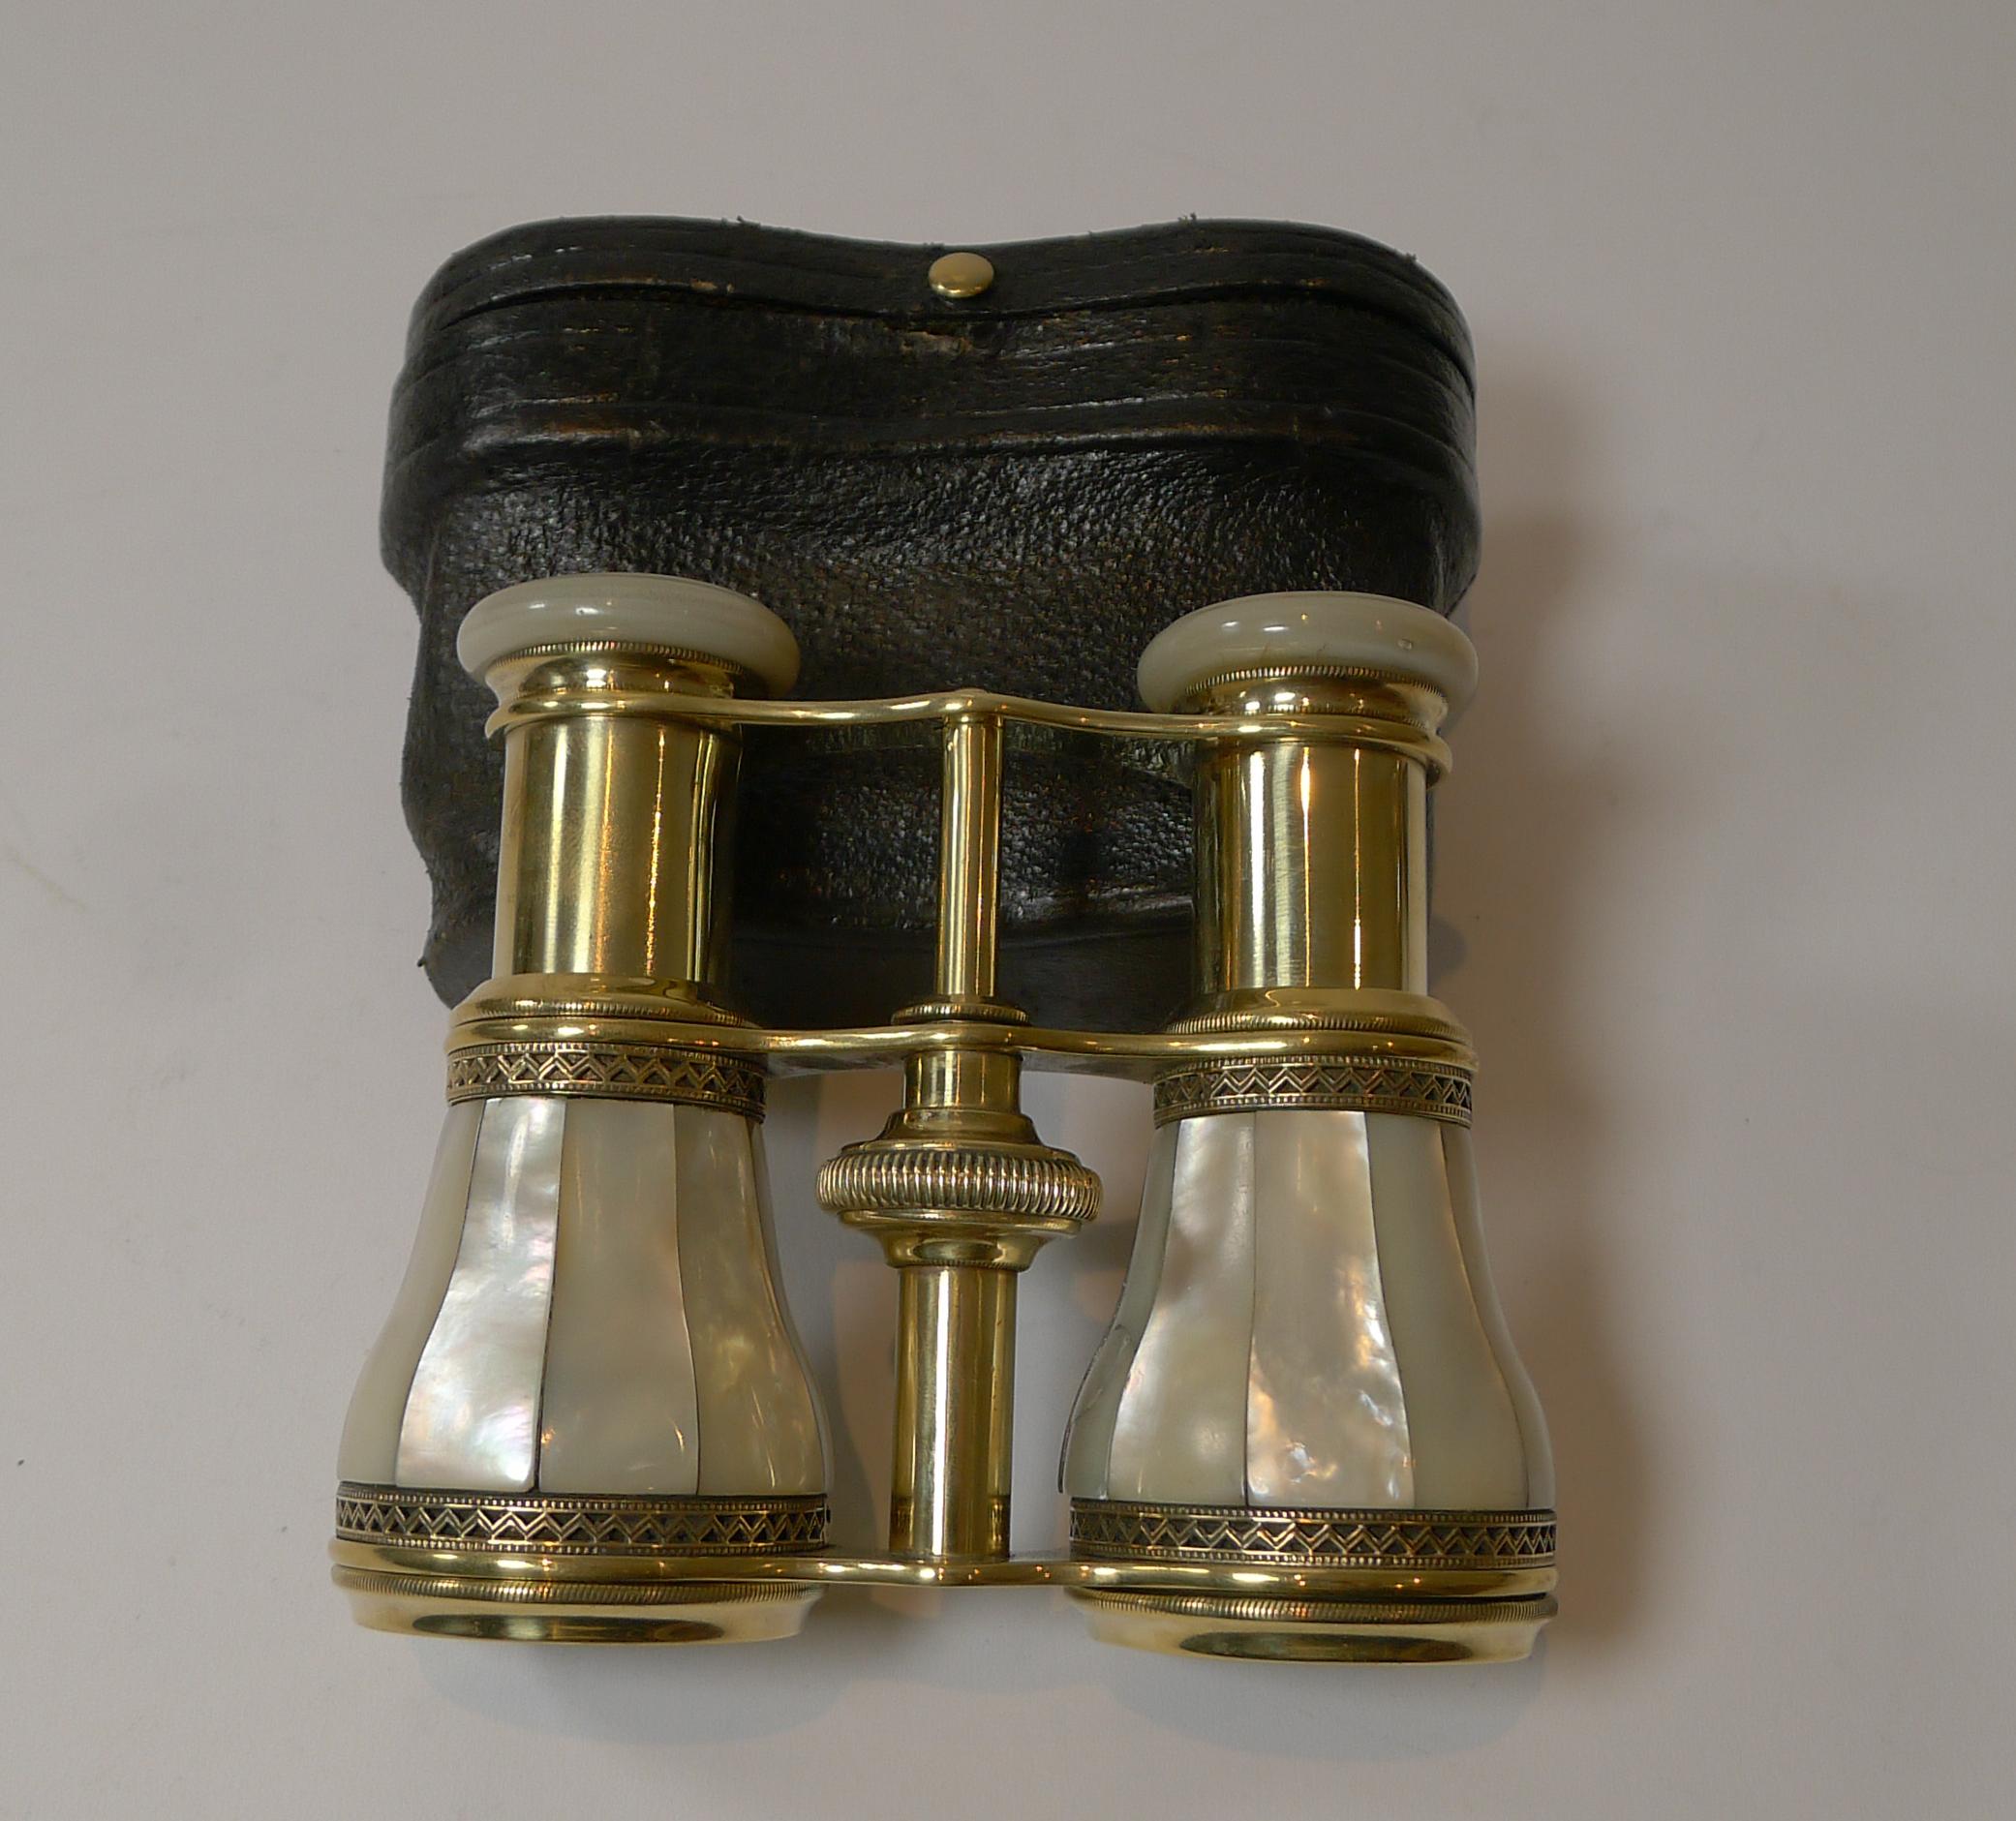 A rather unusual pair of antique opera glasses, perfect for the theatre and in full working order. Unusual with the decorative filigree detail.

They are clad in Mother of Pearl or Nacre shell with it's iridescent qualities.

Dating to c.1900